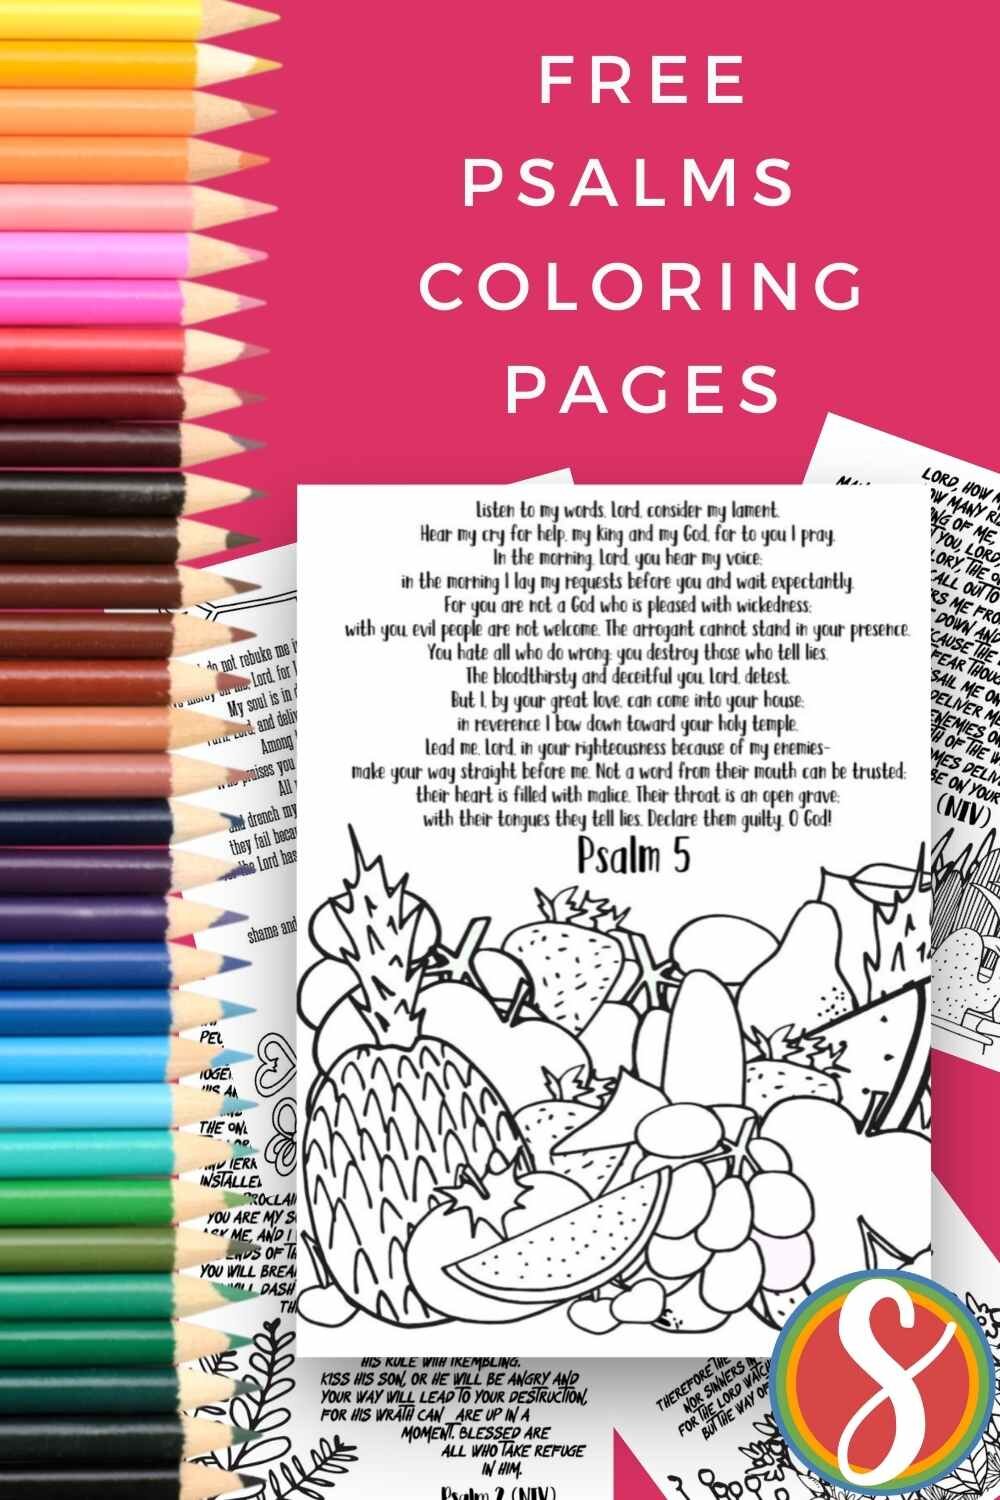 150 Free Psalms coloring pages from Stevie Doodles! It is so easy to print these 150 psalms pages